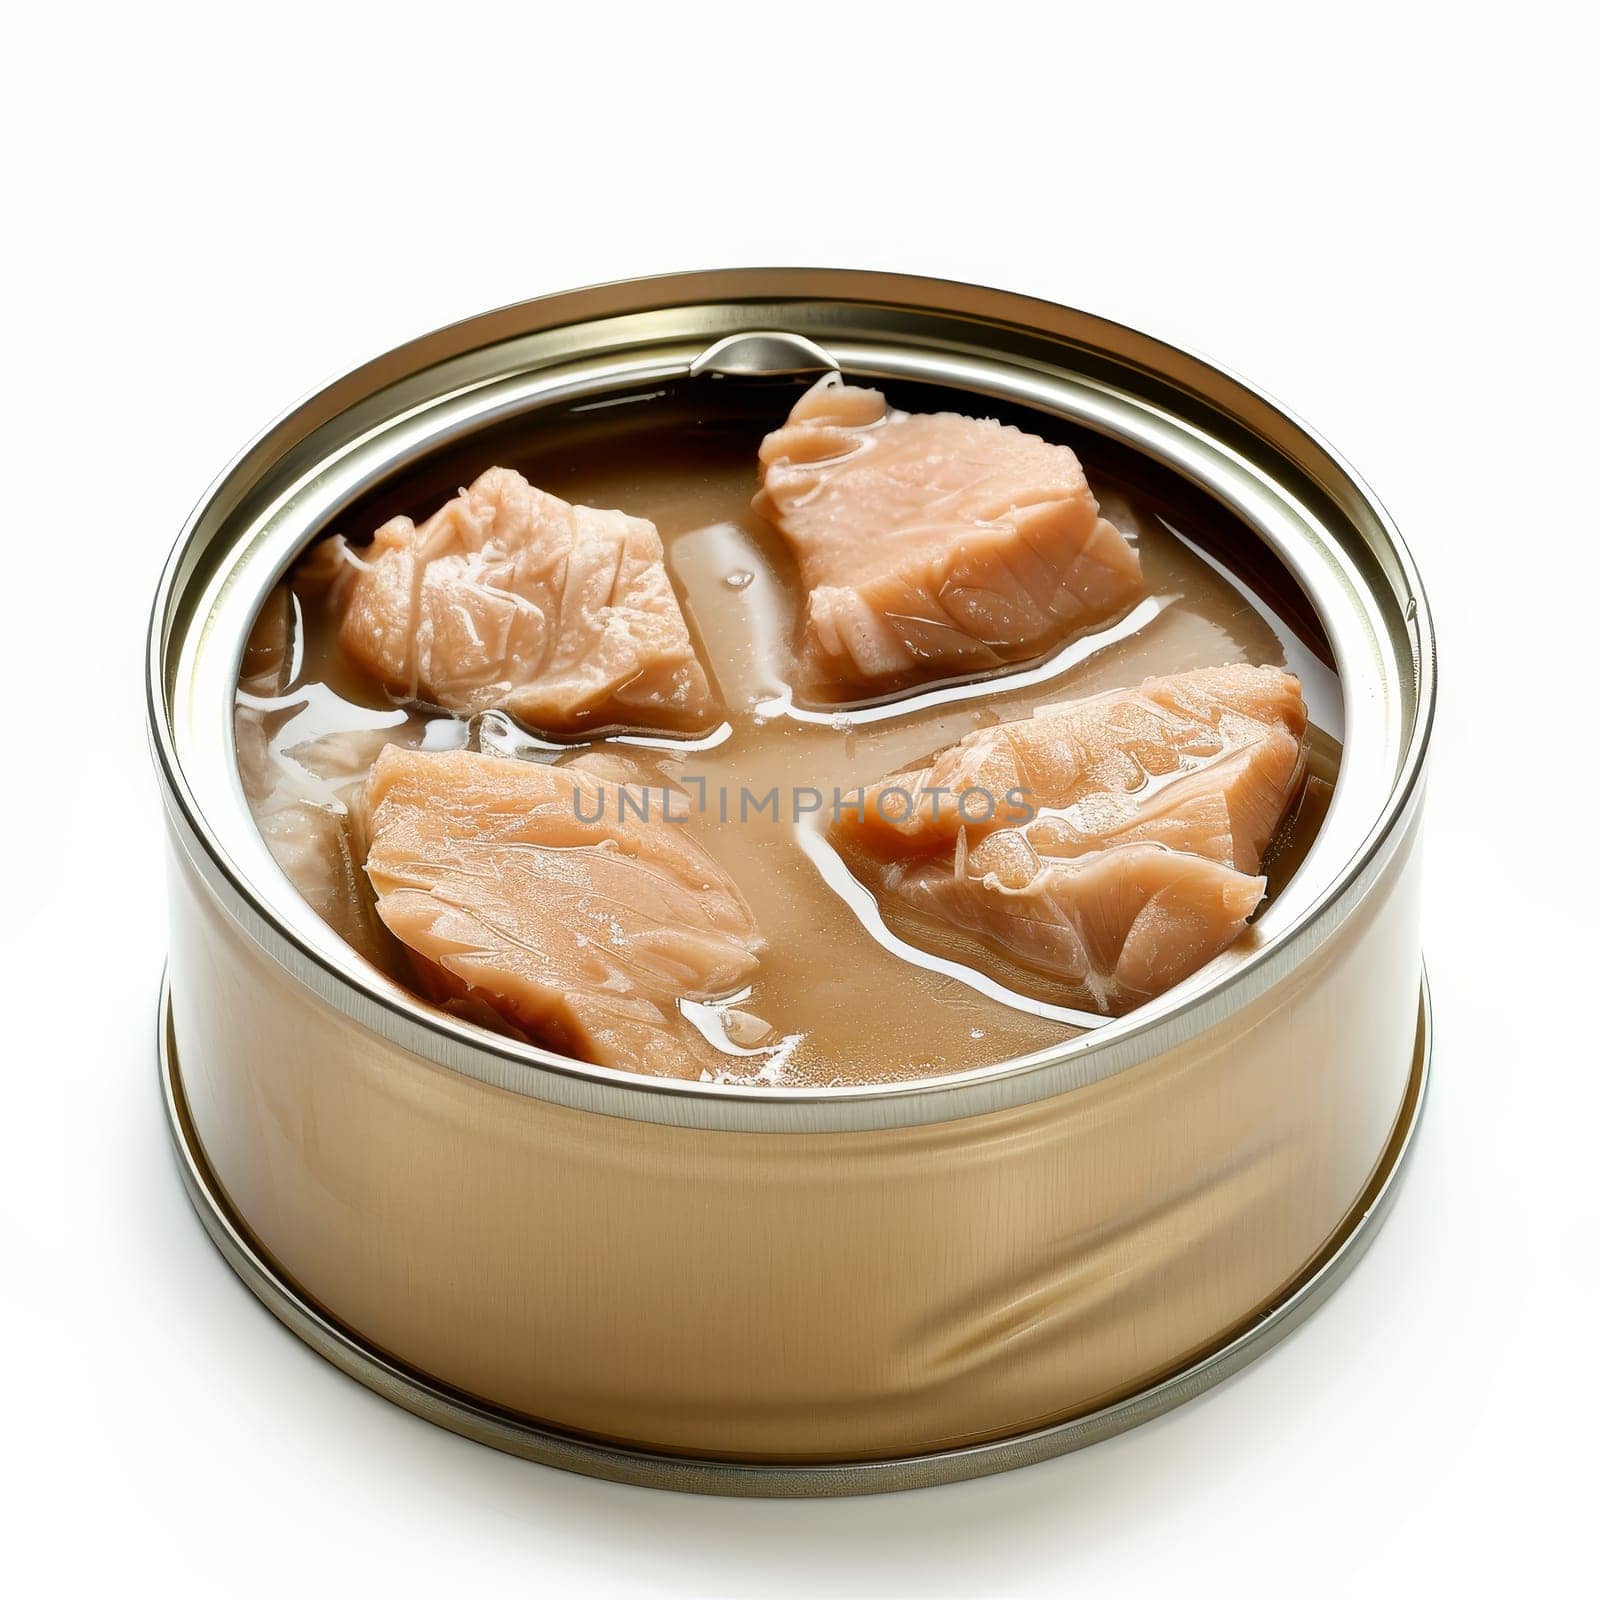 Open can displaying neatly packed slices of tuna submerged in oil, shot on a white background.. by sfinks